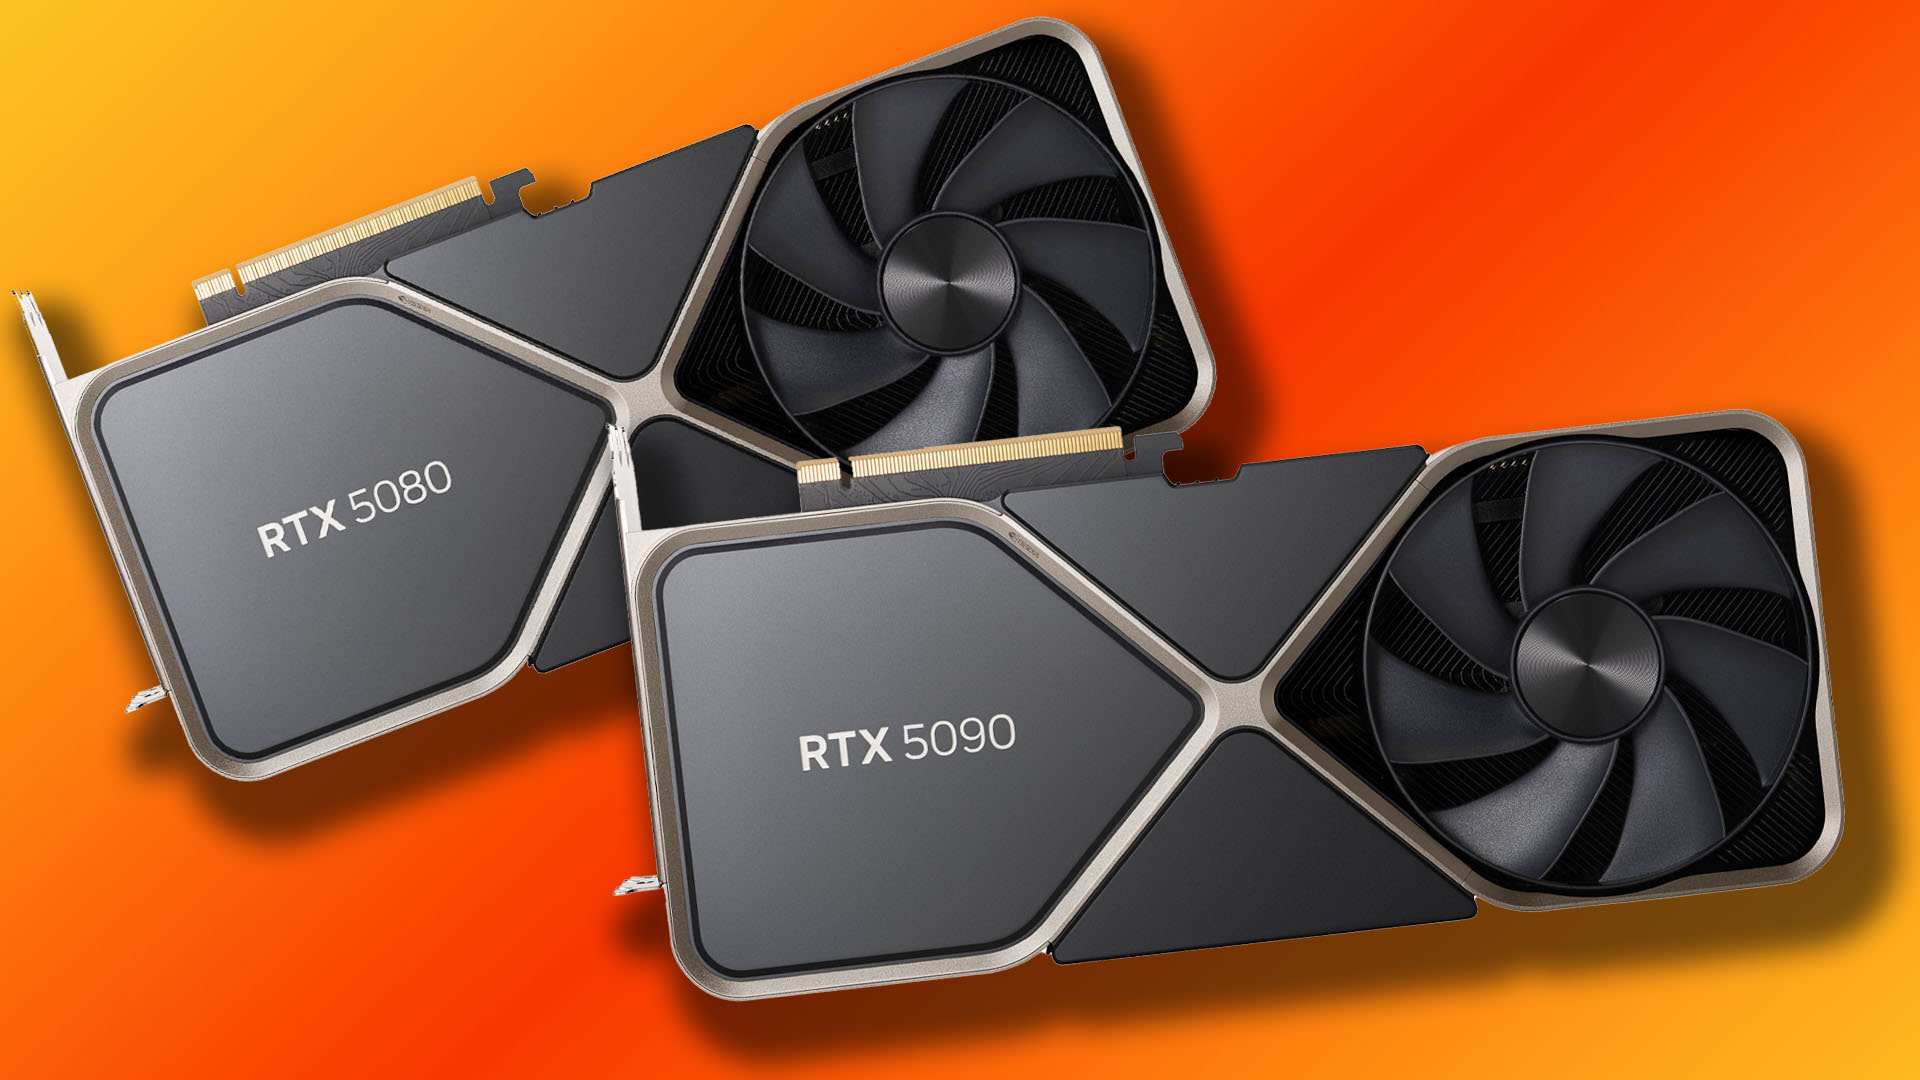 Nvidia RTX 5090 release date expected in 2024, according to report